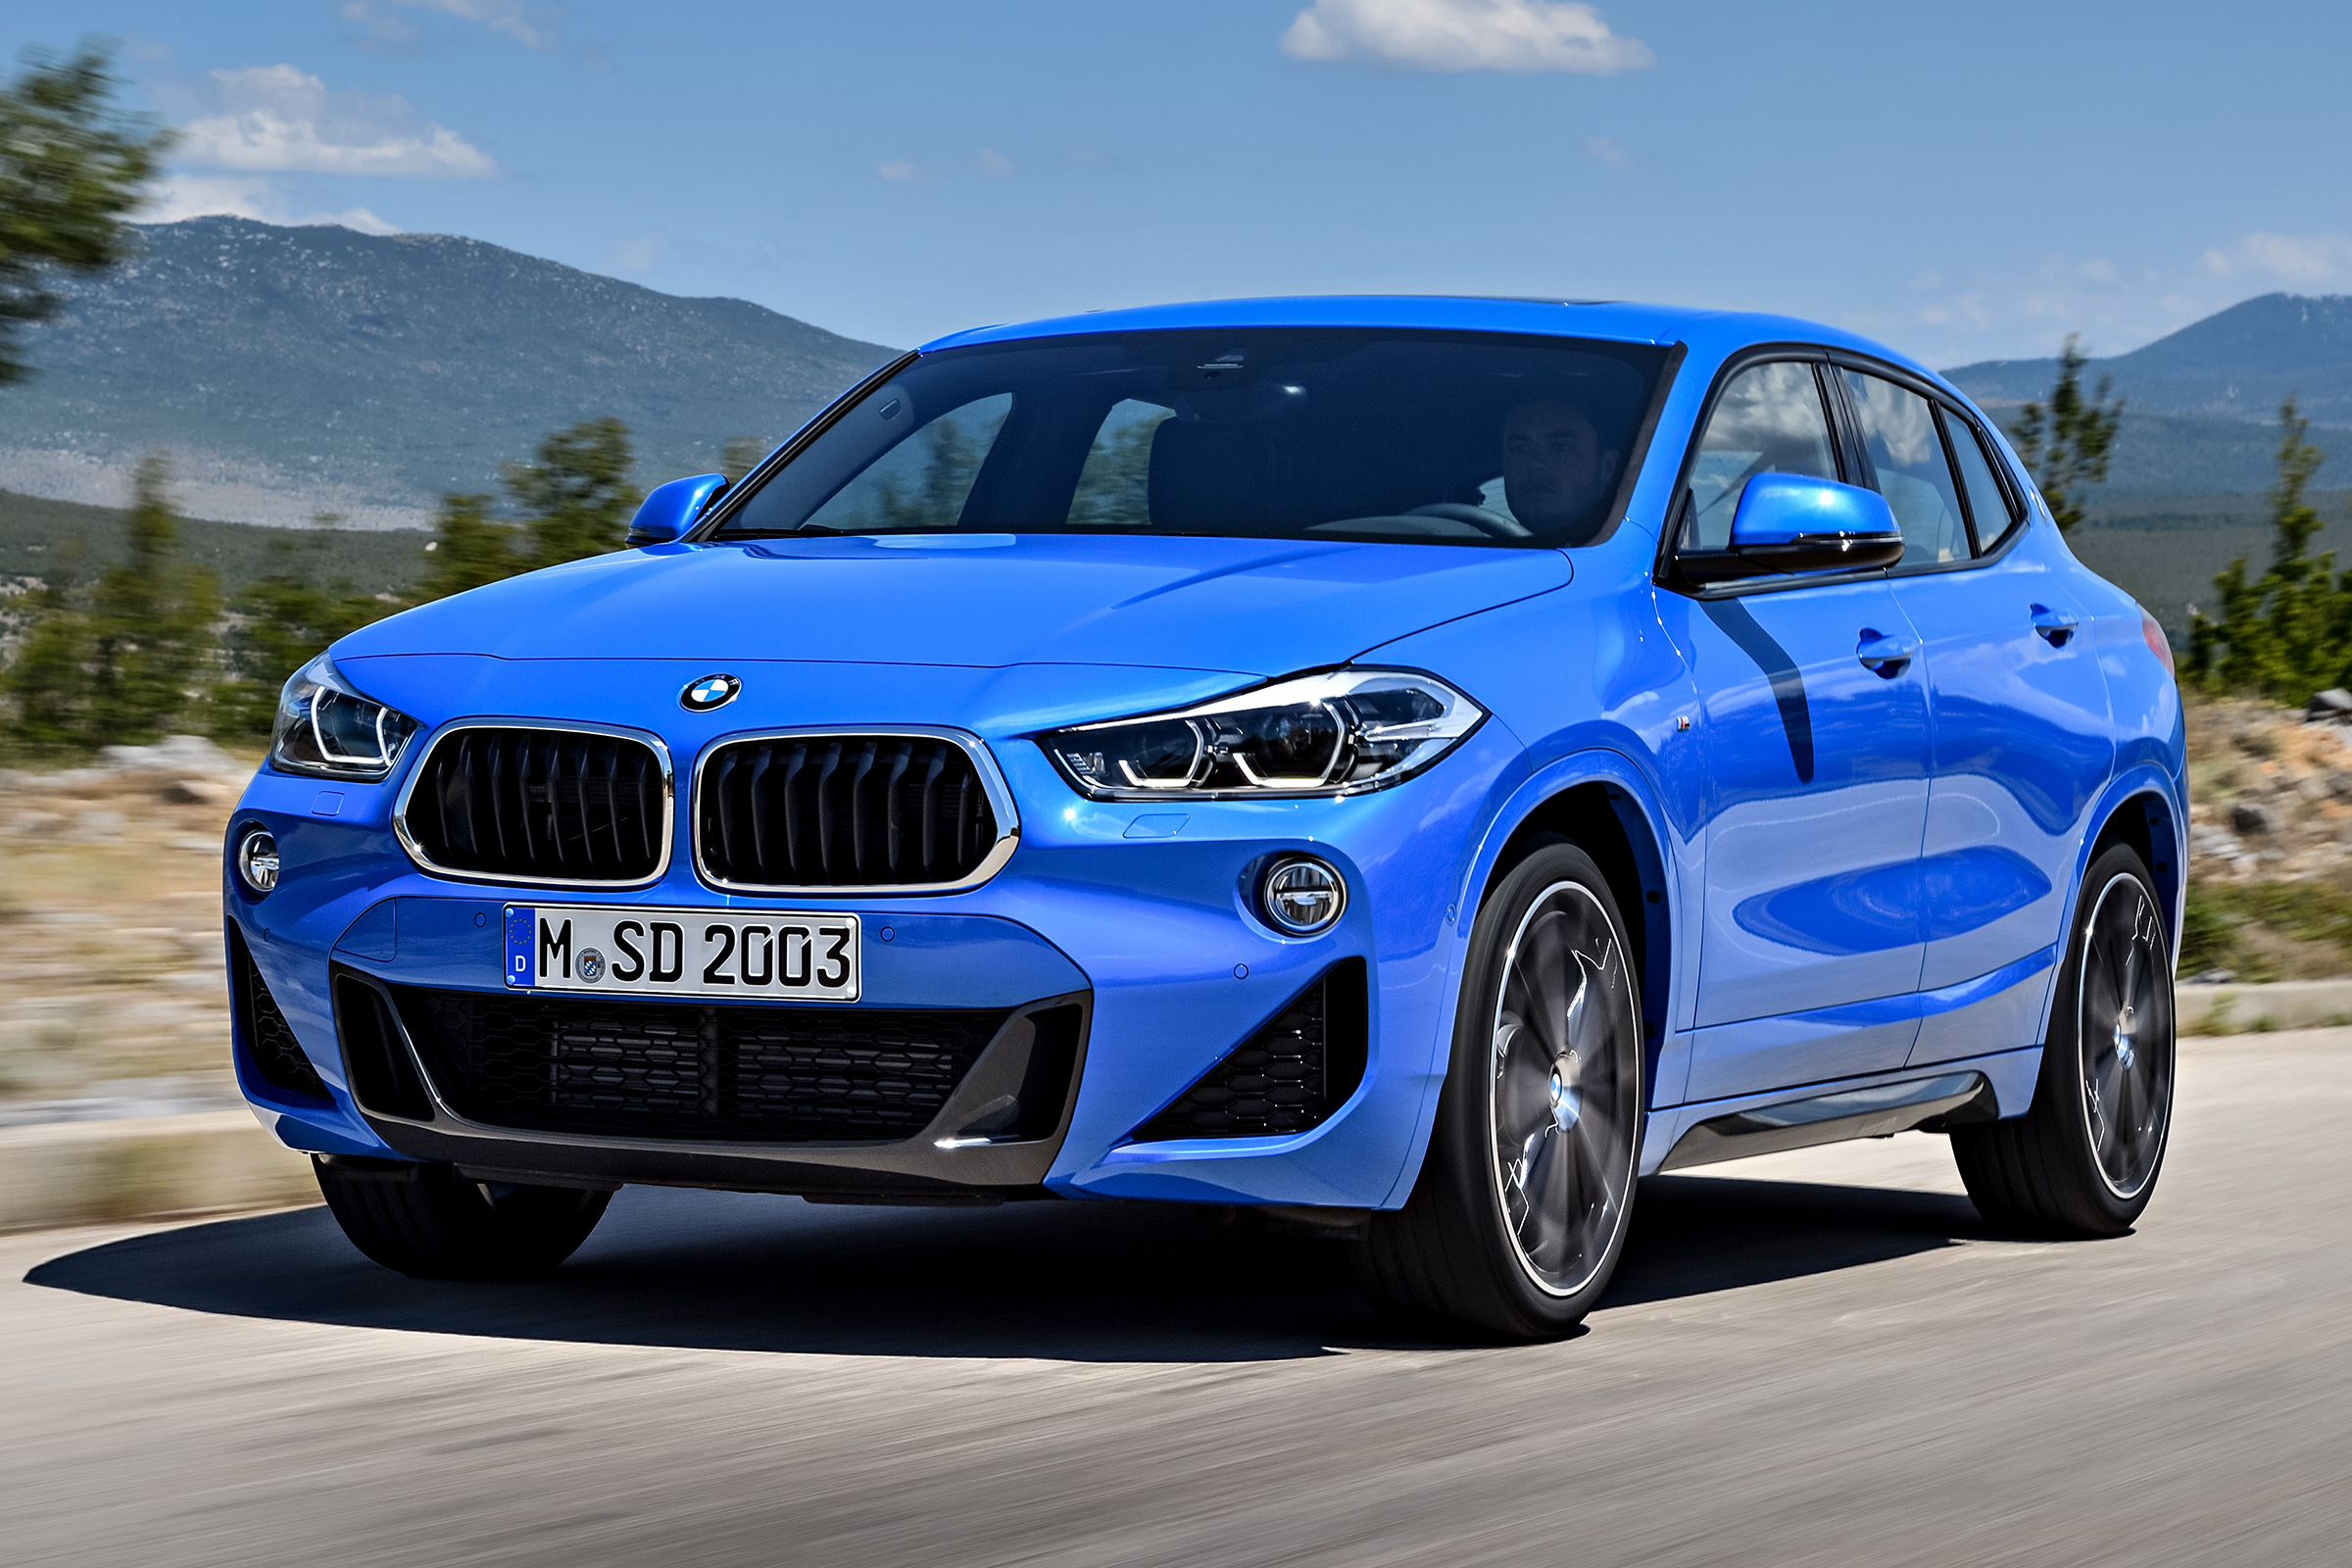 New 2018 BMW X2 SUV: specs, performance, prices and release date | Auto